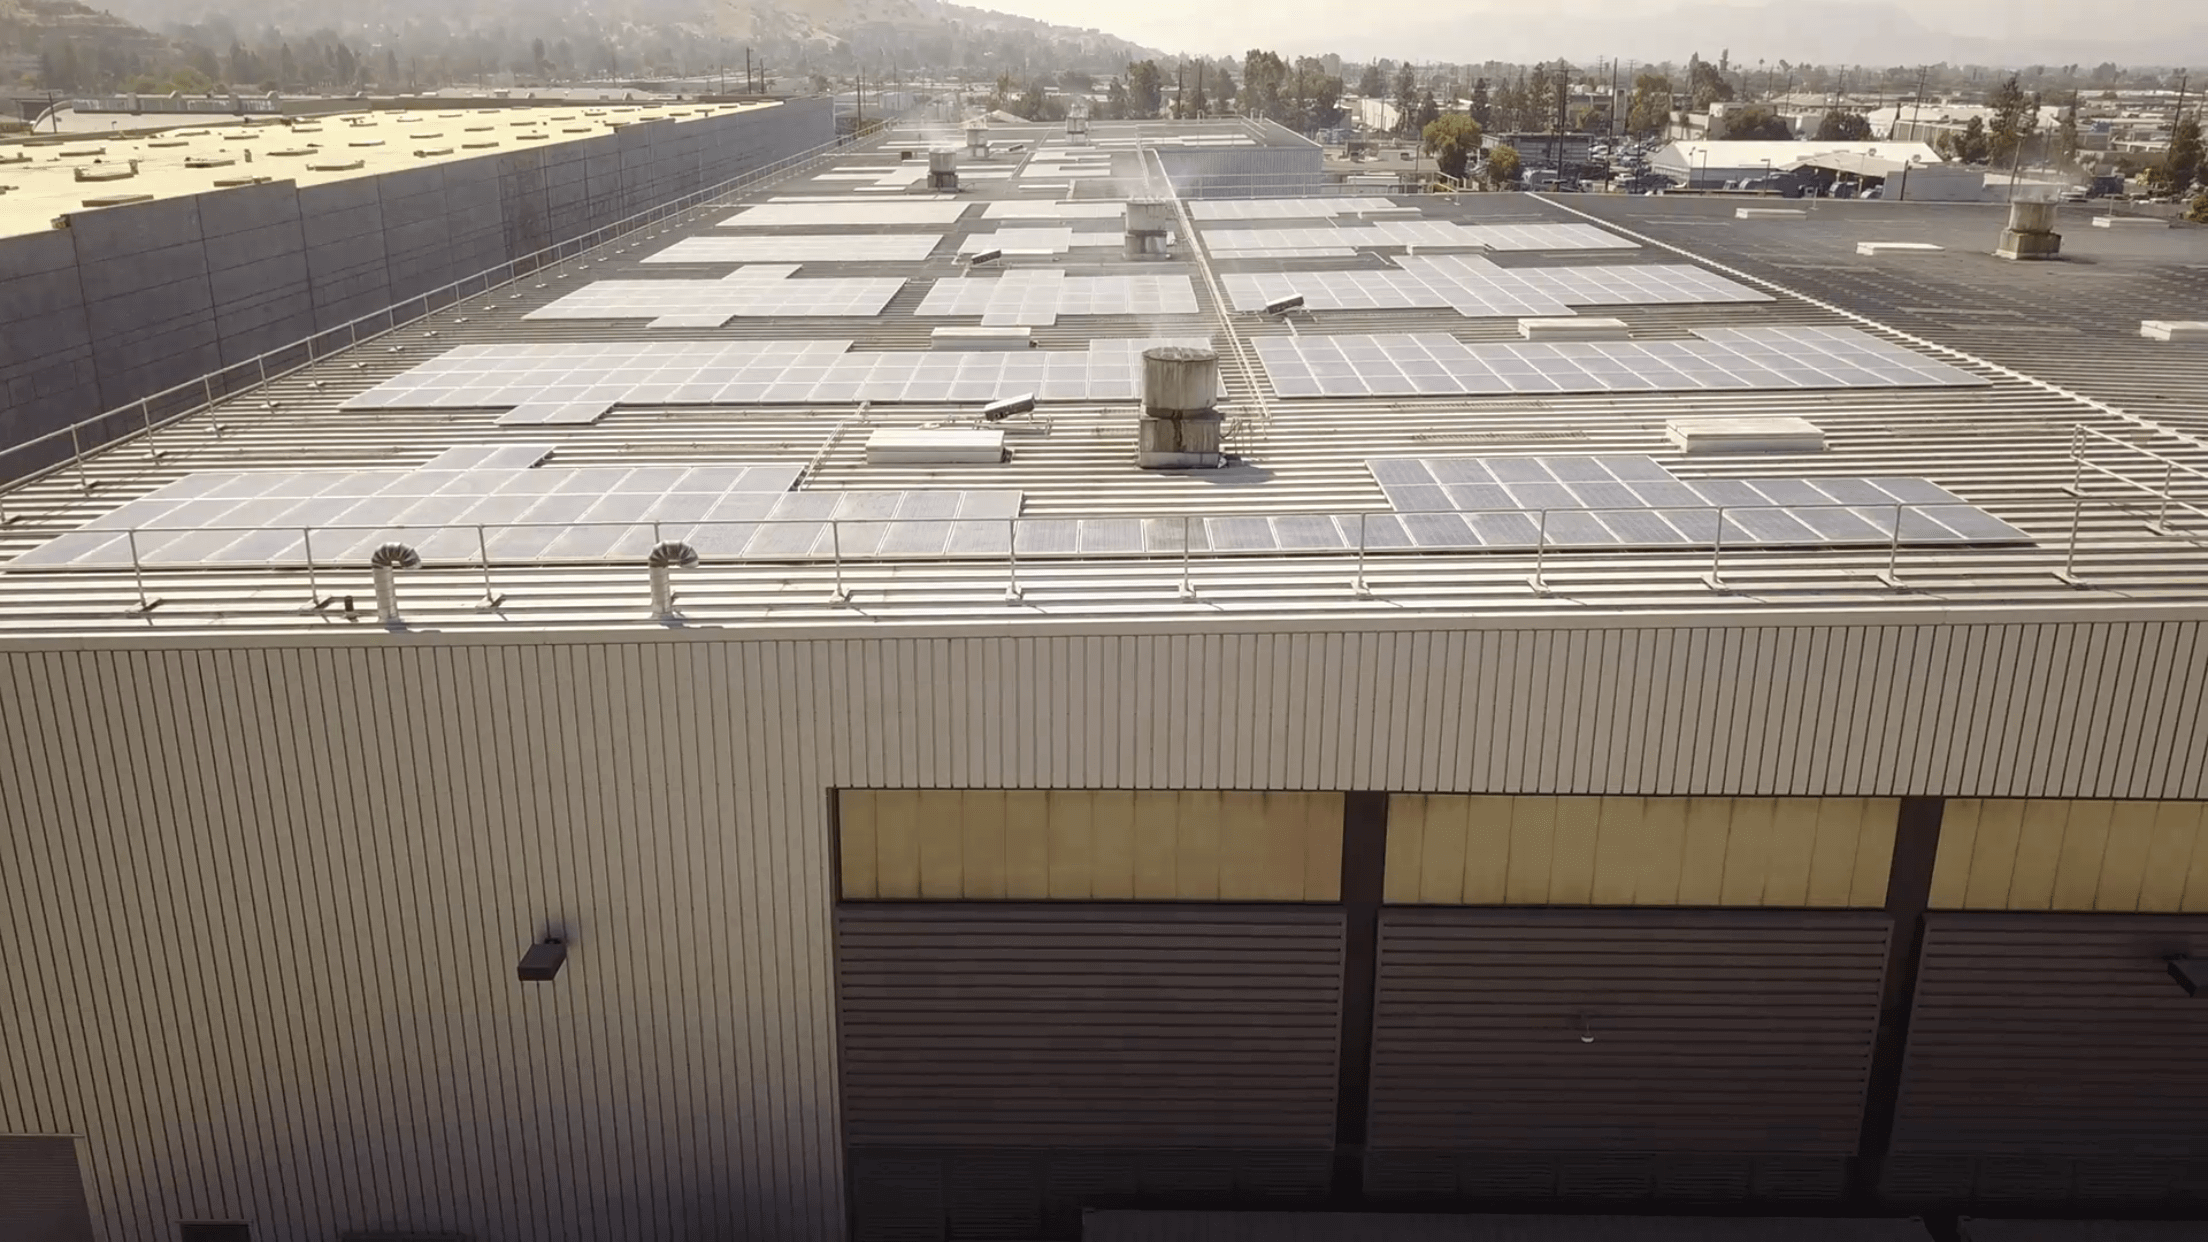 Rooftop solar panel installation for business